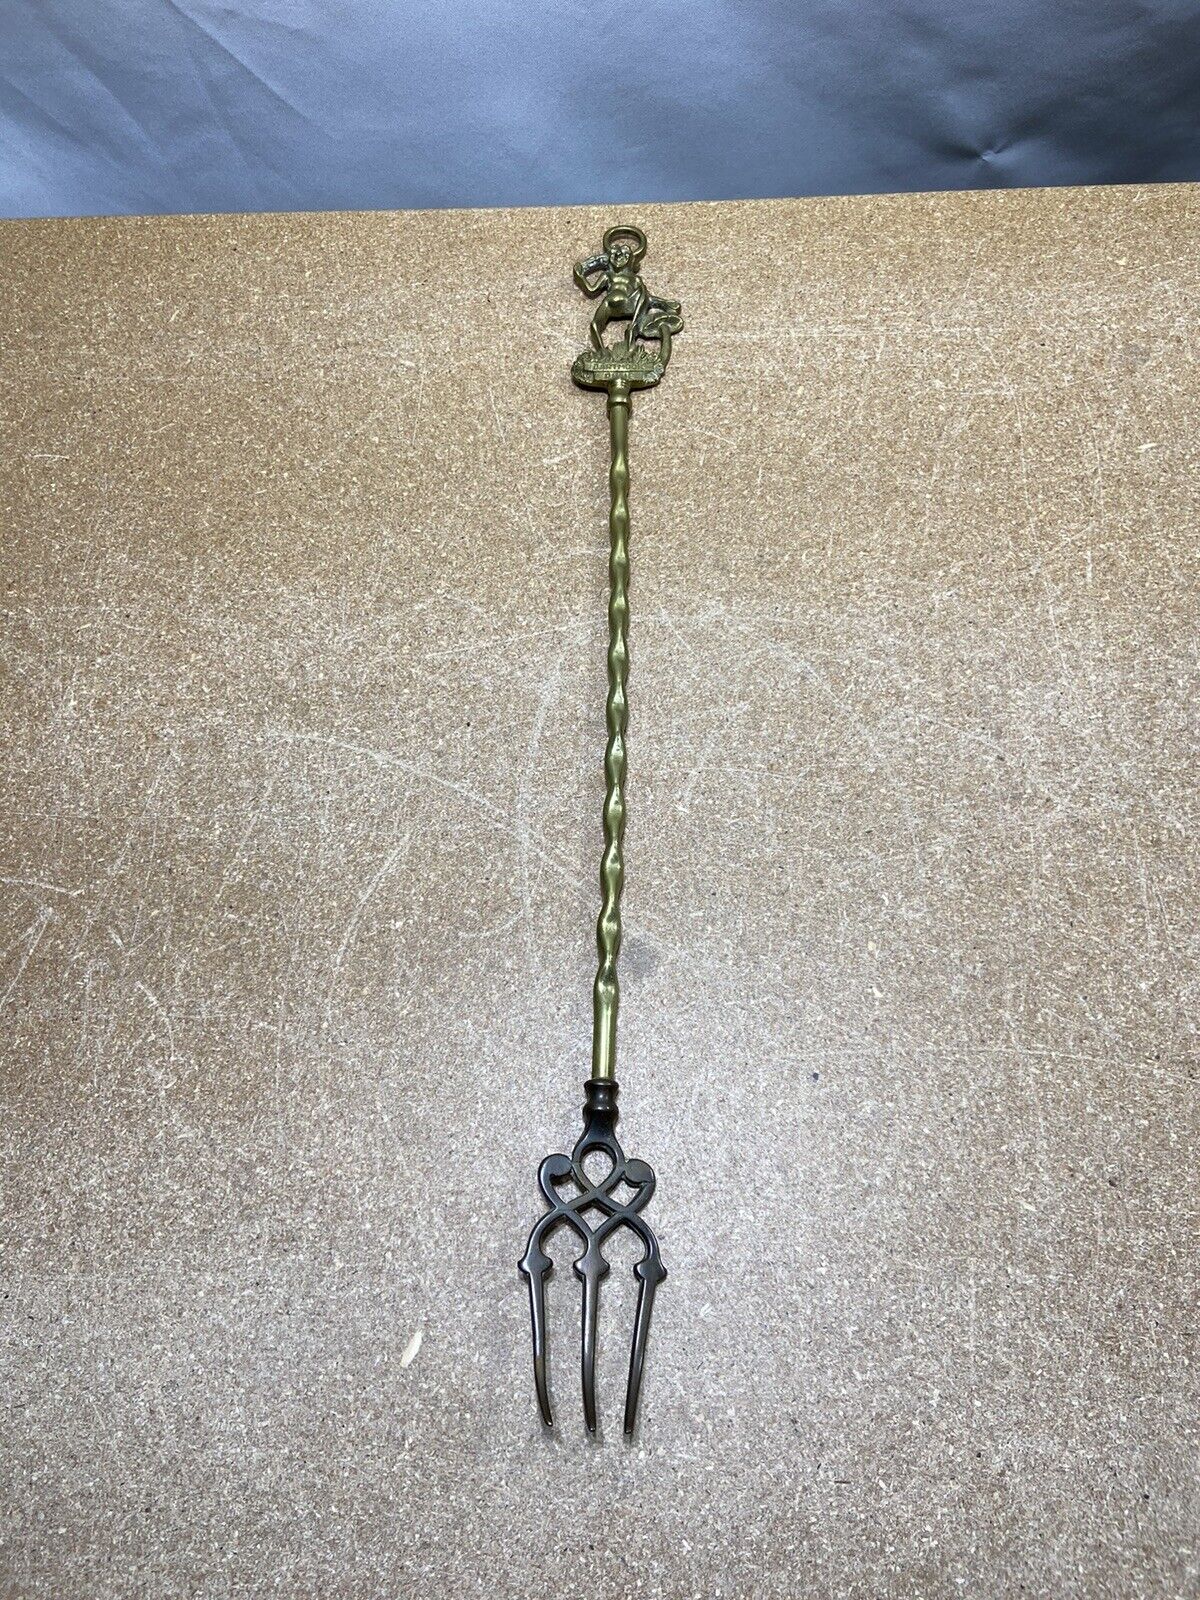 VINTAGE DARTMOOR PIXIE THREE-PRONG 20” Toasting FORK COLLECTIBLE RARE